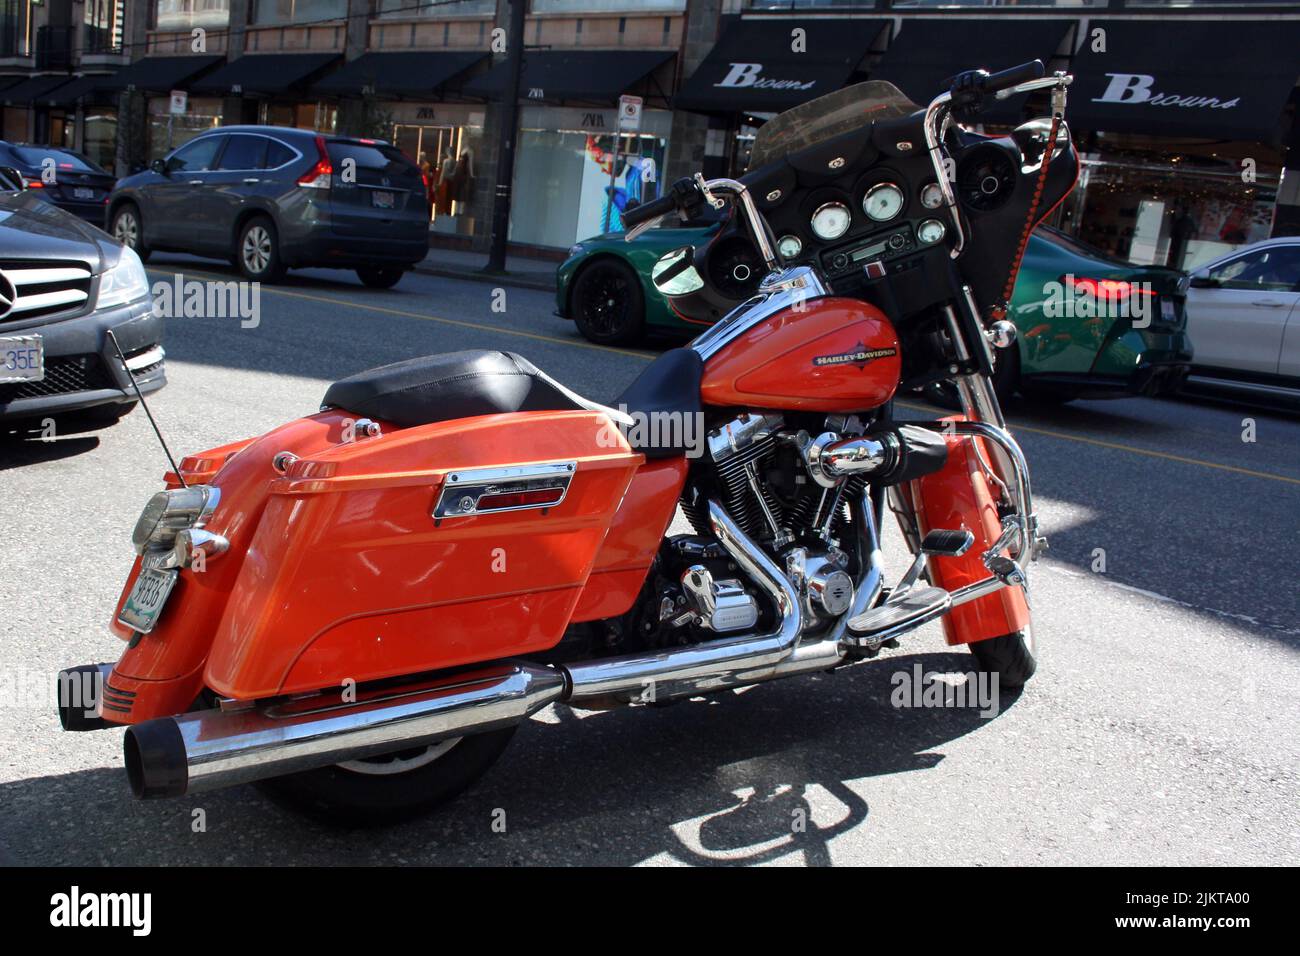 A orange Harley Davidsson motorcycle in the street of downtown Vancouver, British Columbia, Canada Stock Photo